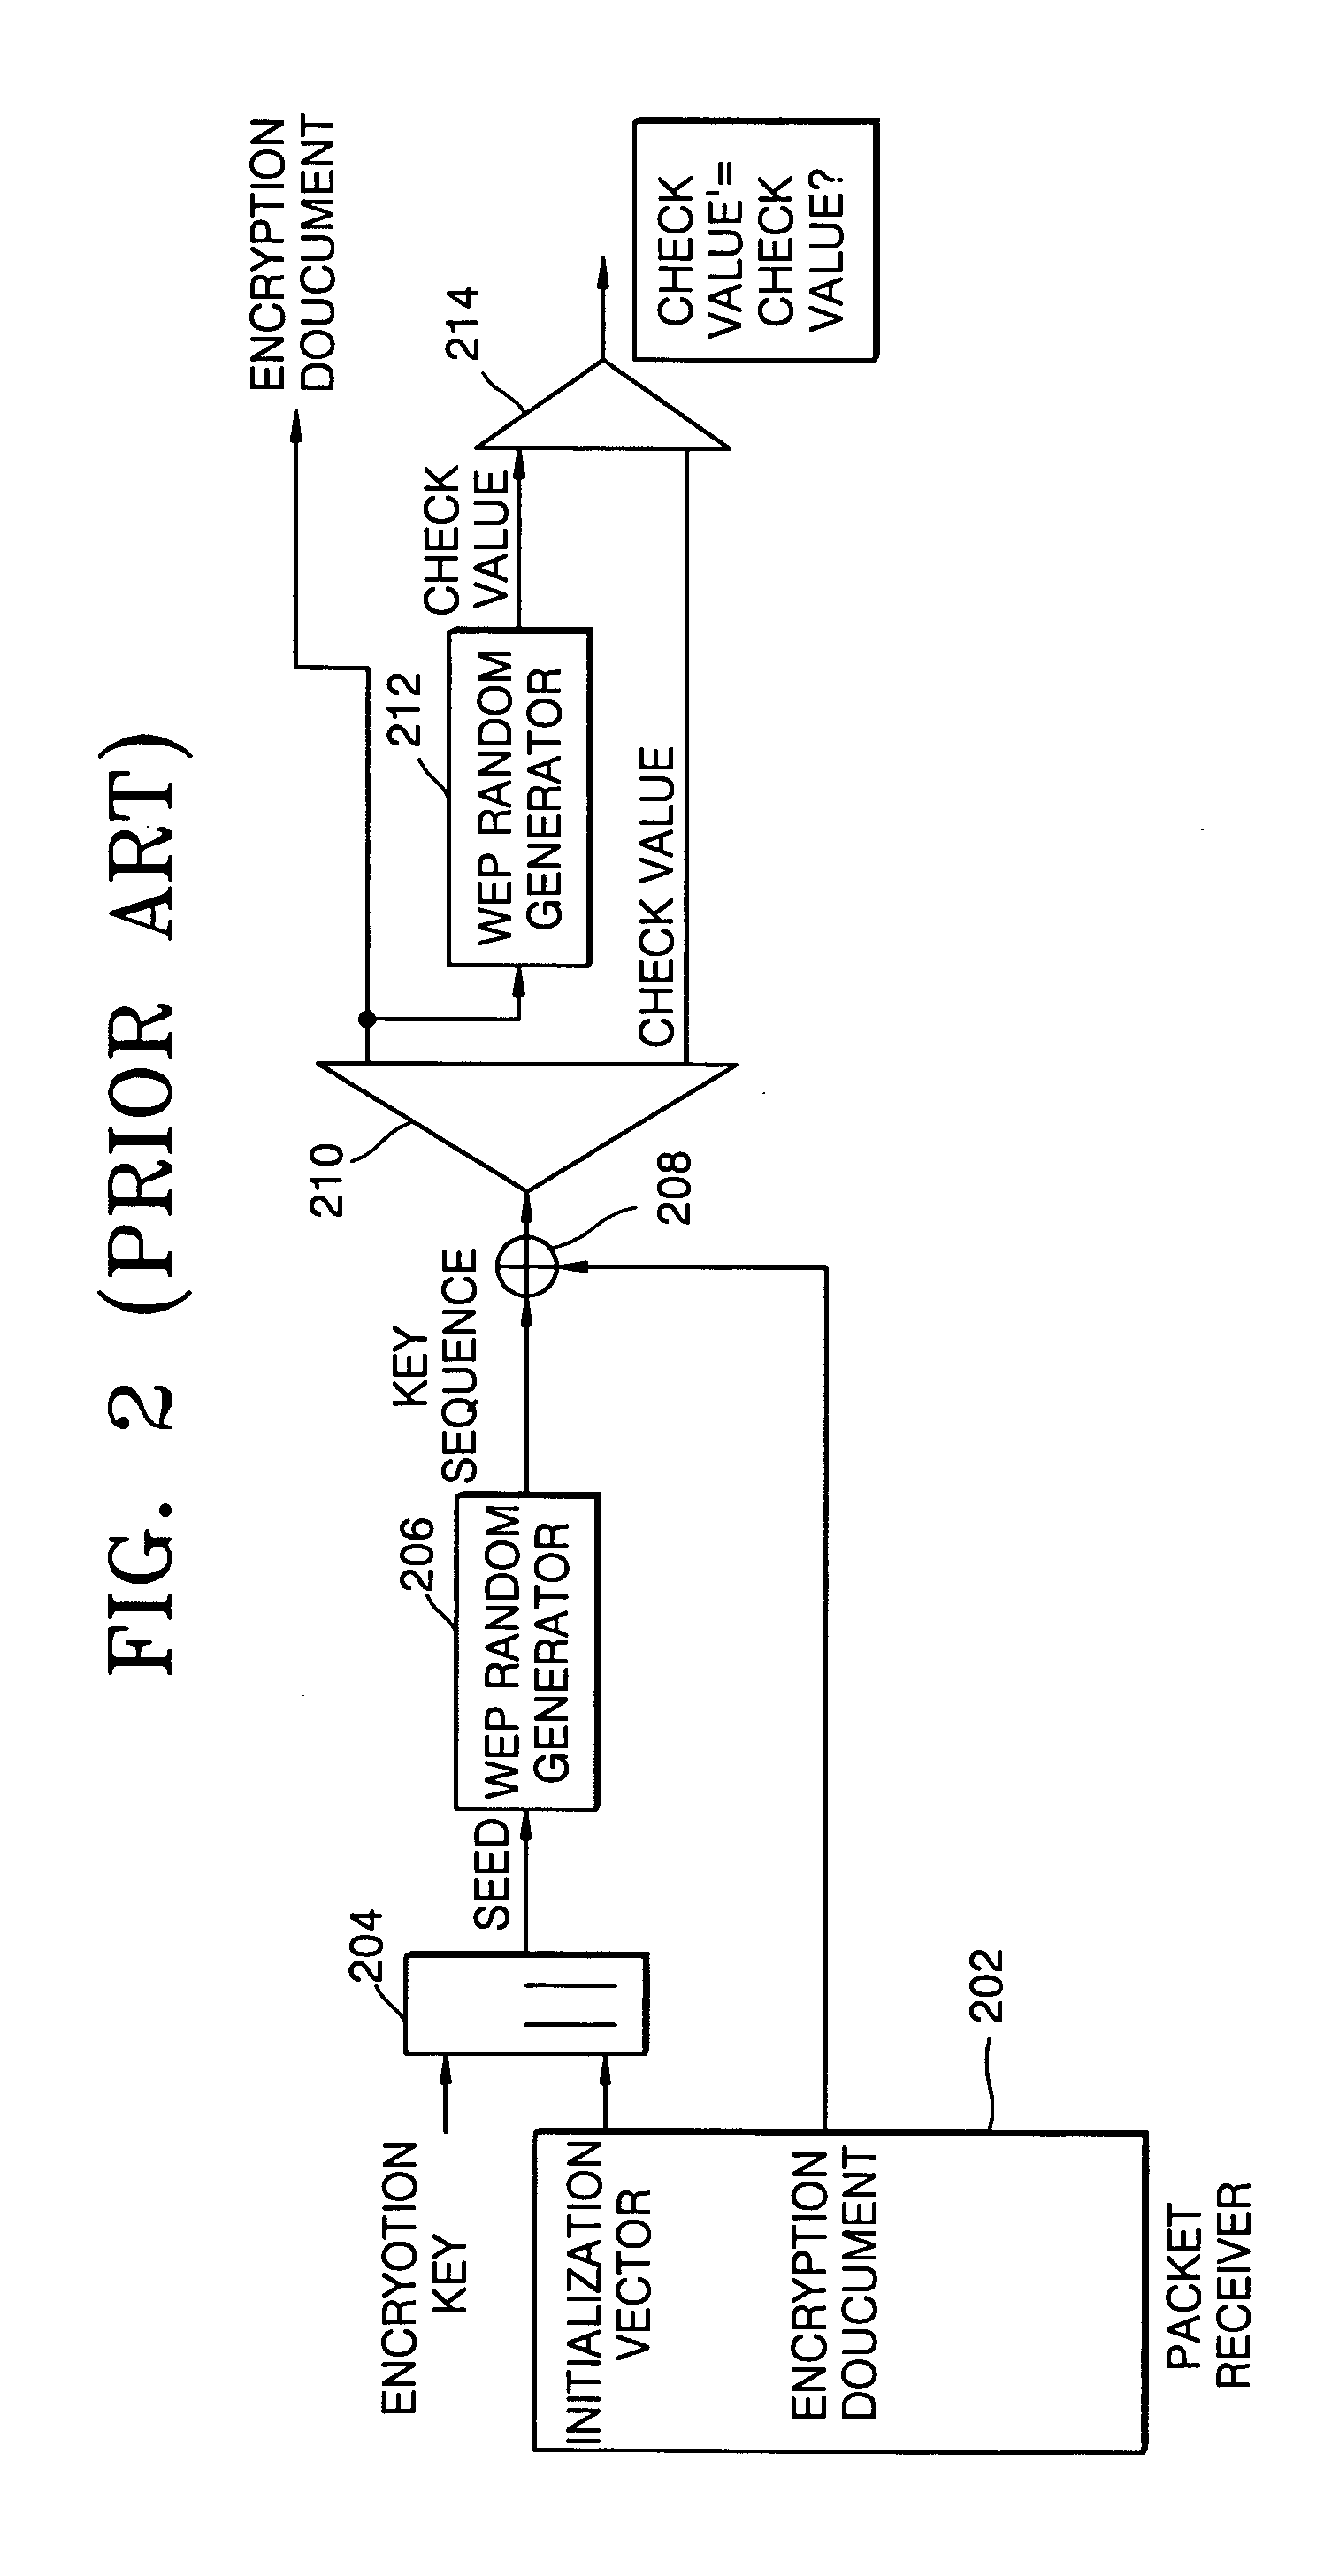 Method of generating an encryption key without use of an input device, and apparatus therefor